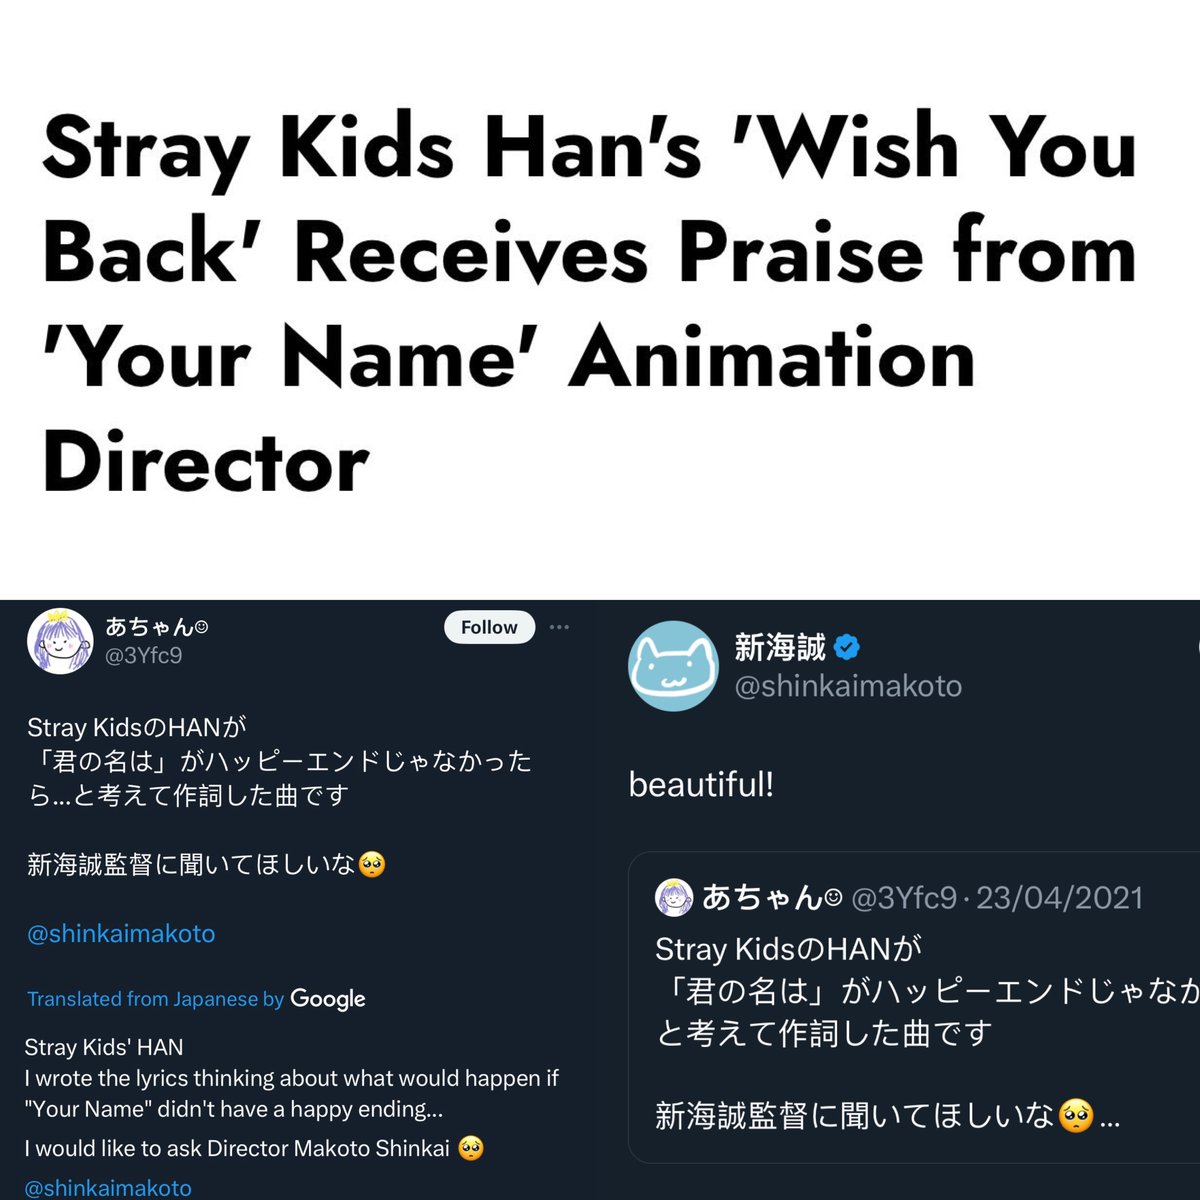 HAN’s Wish You Back receiving praise, being called “beautiful! by Your Name director ~ #HAN wrote the lyrics reimagining what would happen if the film didn’t have a happy ending #한